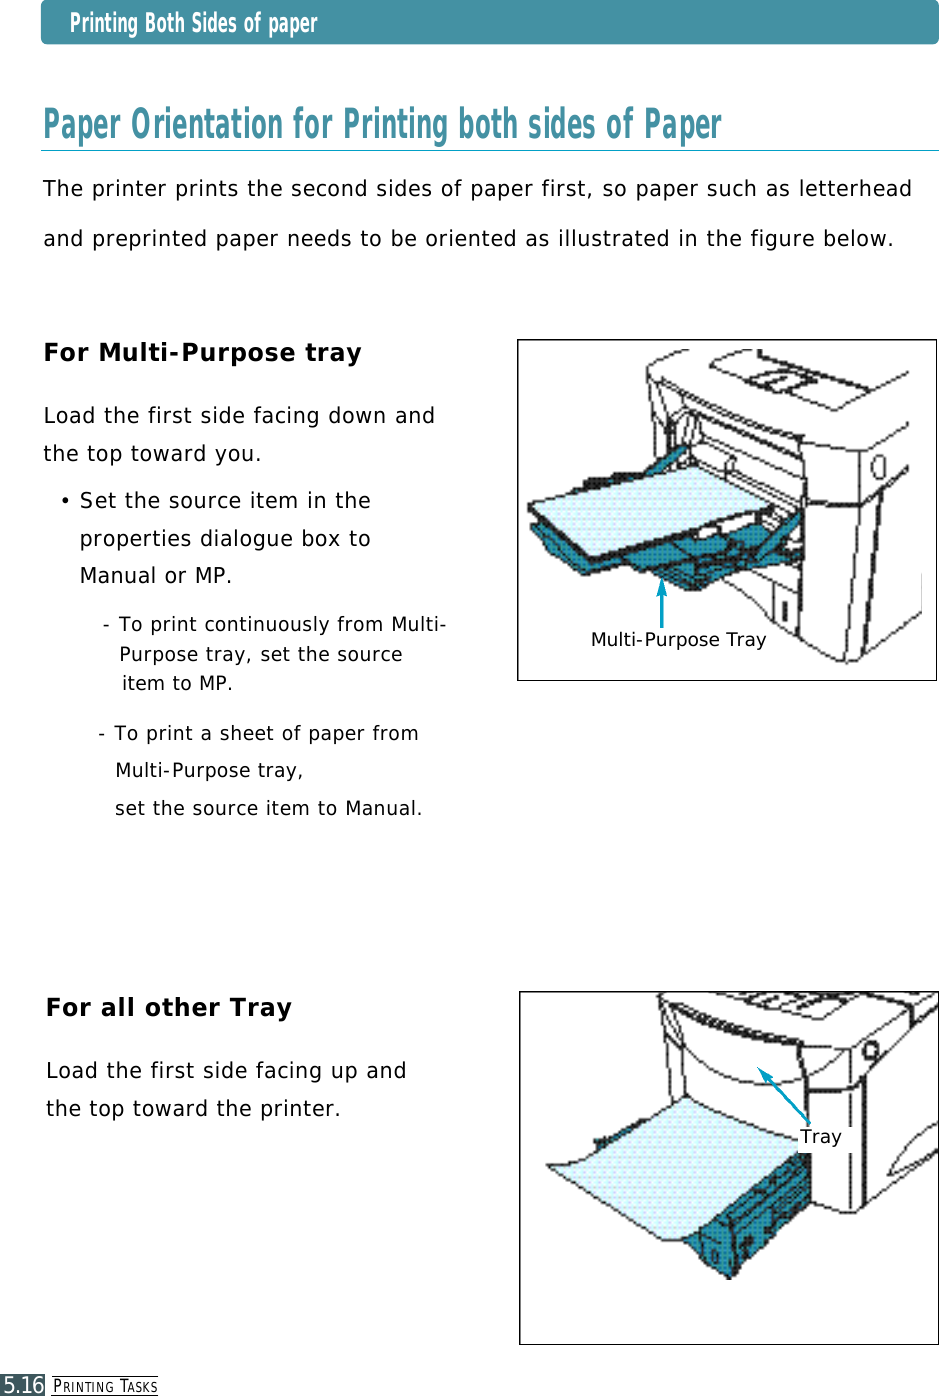 PR I N T I N G TA S K S5.16The printer prints the second sides of paper first, so paper such as letterhead and preprinted paper needs to be oriented as illustrated in the figure below.Paper Orientation for Printing both sides of PaperFor Multi-Purpose trayLoad the first side facing down and the top toward you. • Set the source item in theproperties dialogue box to Manual or MP.- To print continuously from Multi-Purpose tray, set the source item to MP.- To print a sheet of paper from Multi-Purpose tray, set the source item to Manual.For all other TrayLoad the first side facing up and the top toward the printer. Multi-Purpose TrayTrayPrinting Both Sides of paper